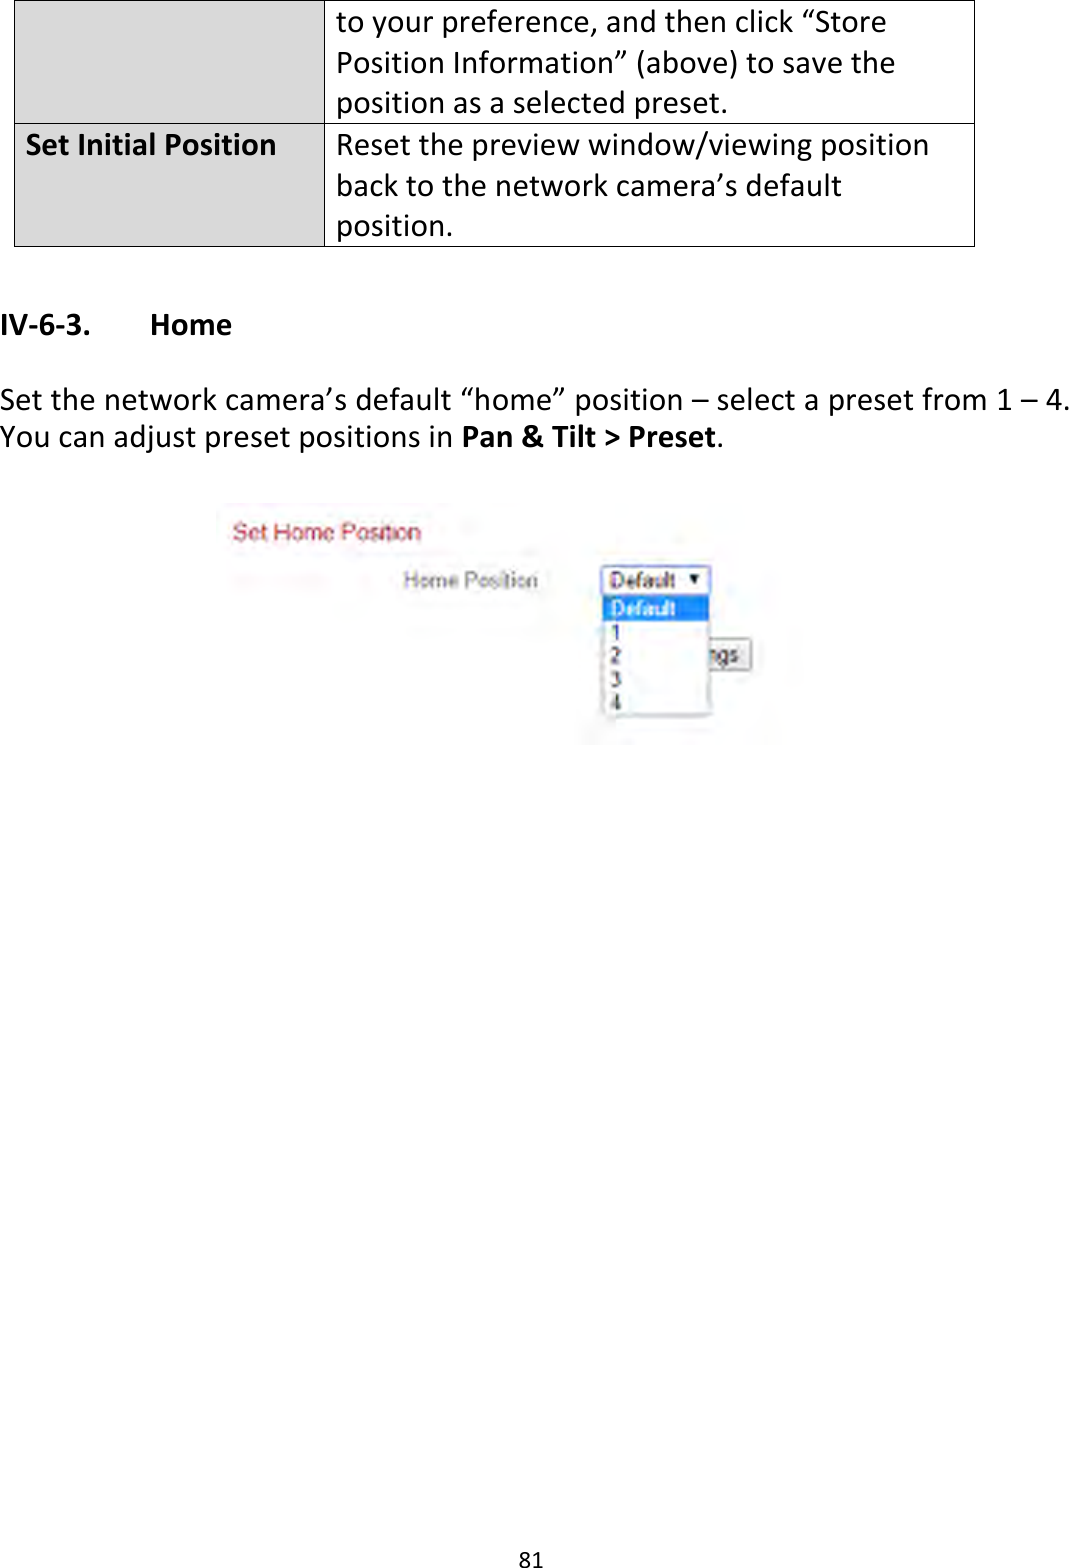 81  to your preference, and then click “Store Position Information” (above) to save the position as a selected preset. Set Initial Position Reset the preview window/viewing position back to the network camera’s default position.  IV-6-3.   Home  Set the network camera’s default “home” position – select a preset from 1 – 4. You can adjust preset positions in Pan &amp; Tilt &gt; Preset.   